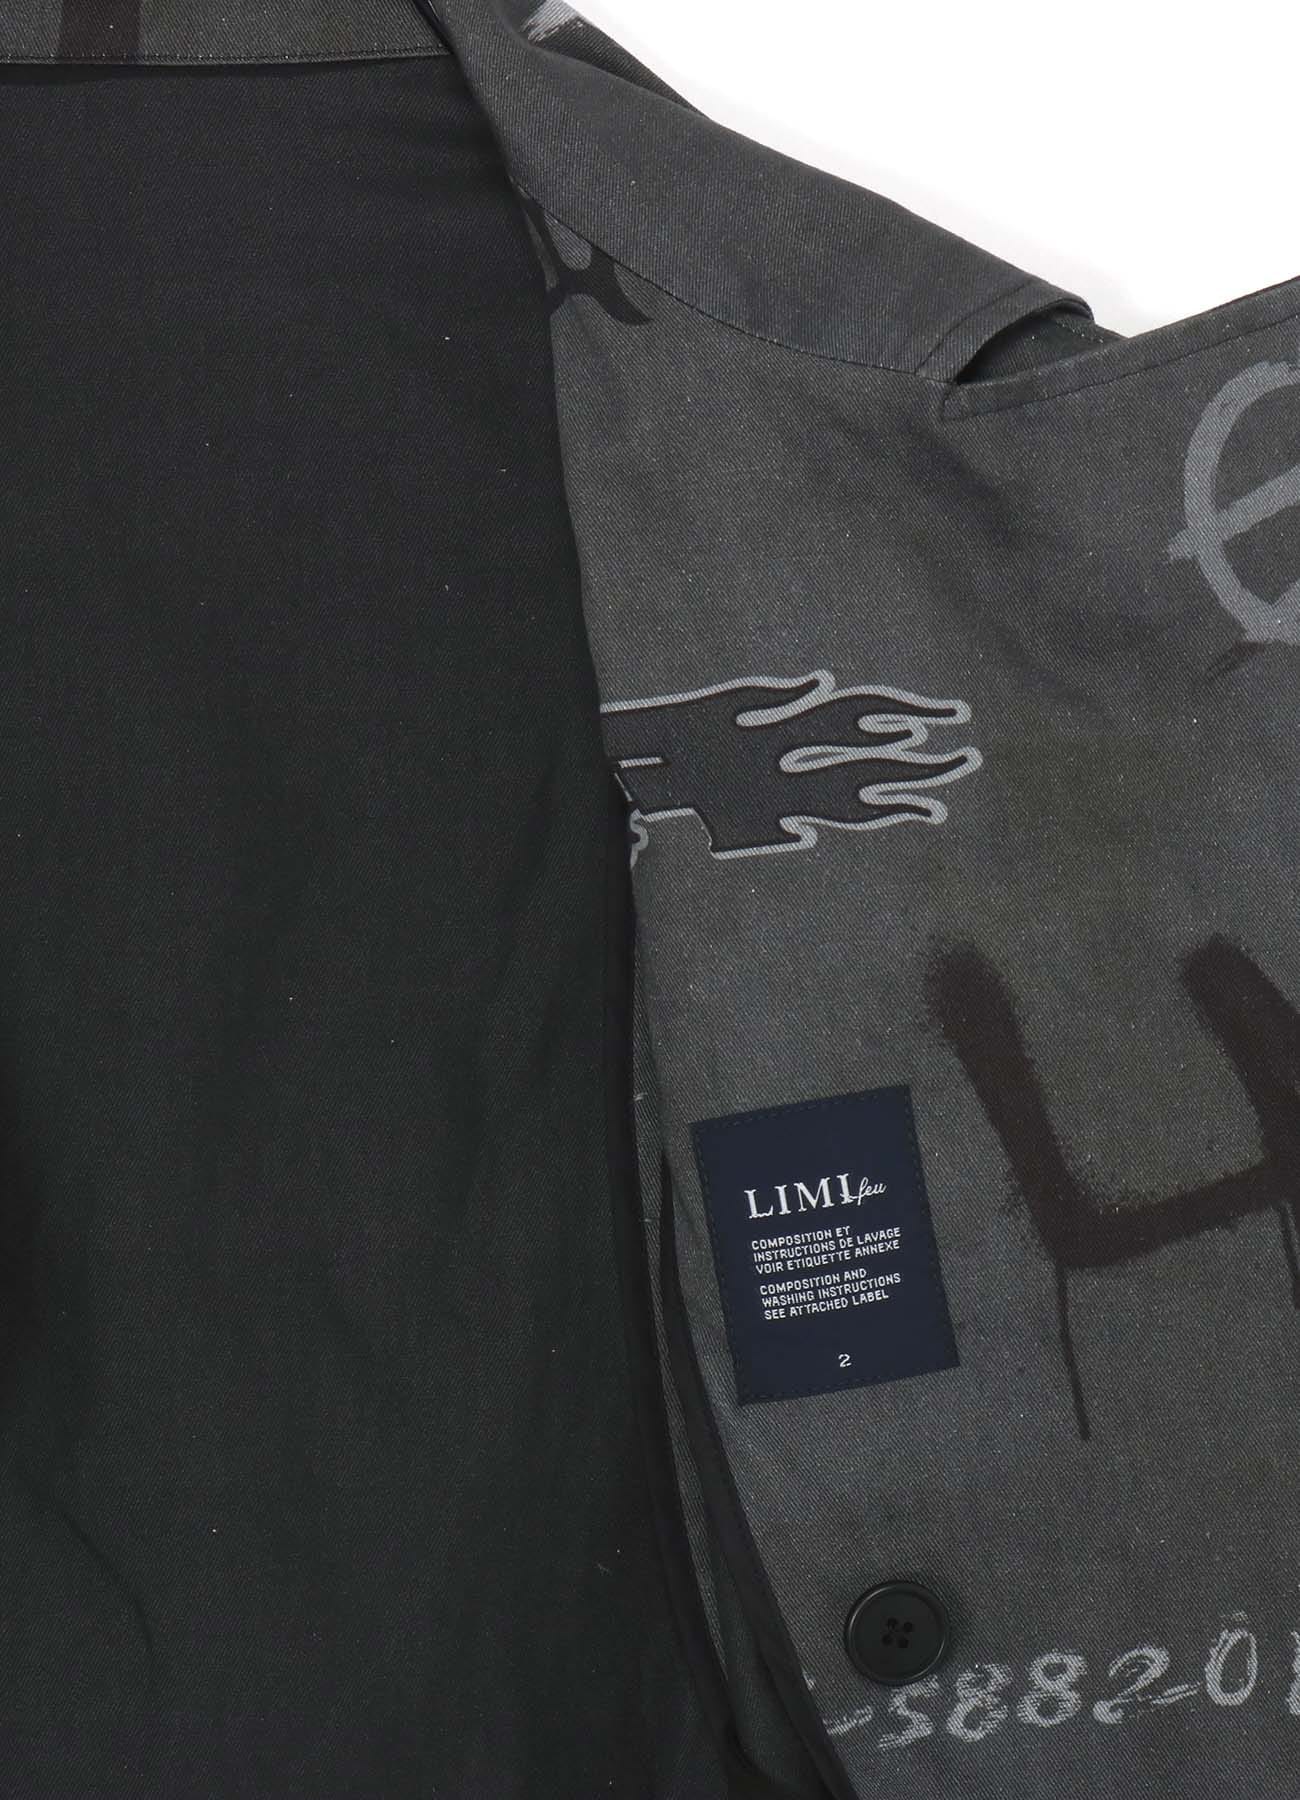 LIMI LOGO COLLAGE PT NET SLEEVES RIDERS JKT(S gray): Vintage 1.1 